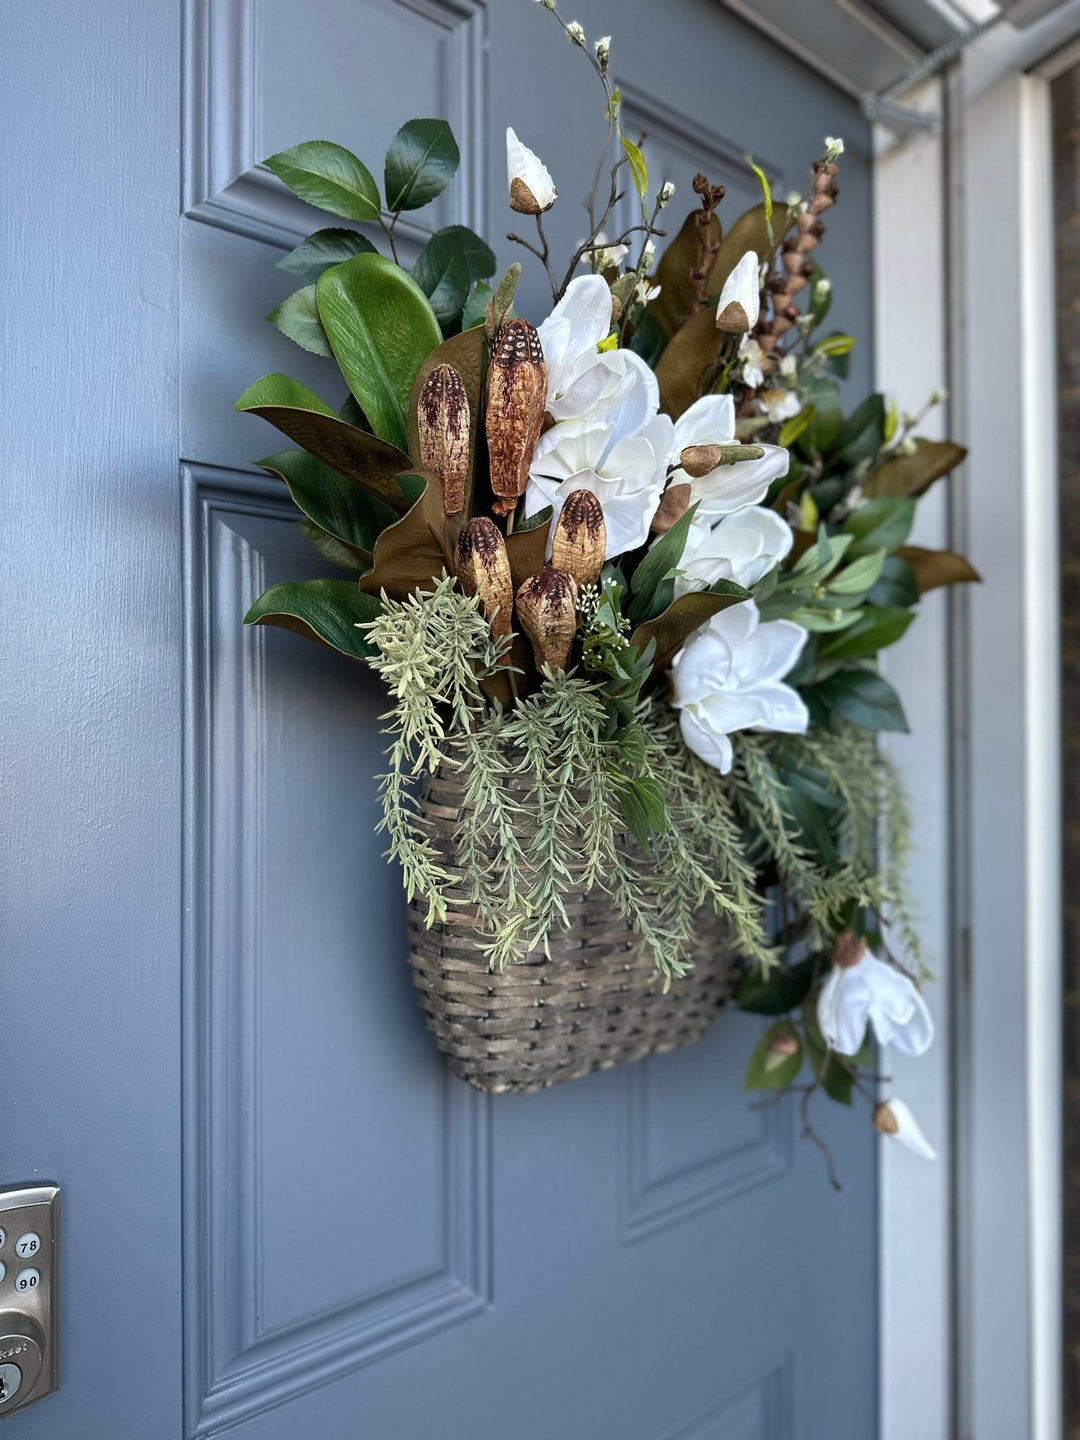 Basket for front door with magnolia florals and greenery with natural branches and pods 24"x21"x5. Matches wreath!!!